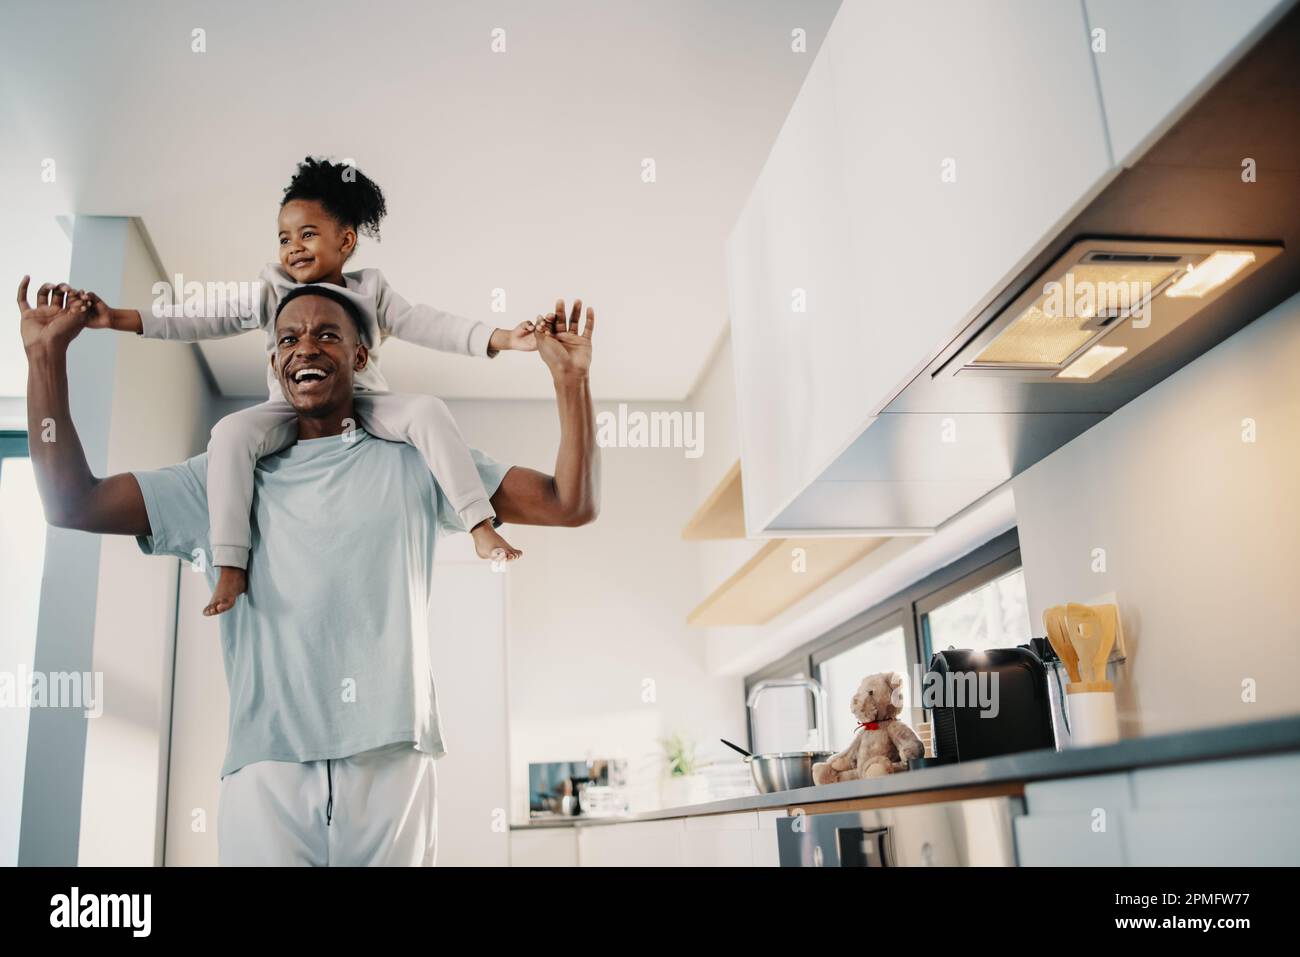 Father carrying his daughter on his shoulders, he smiles and holds her hands outstretched. Man playing with his daughter at home. Family fun between f Stock Photo